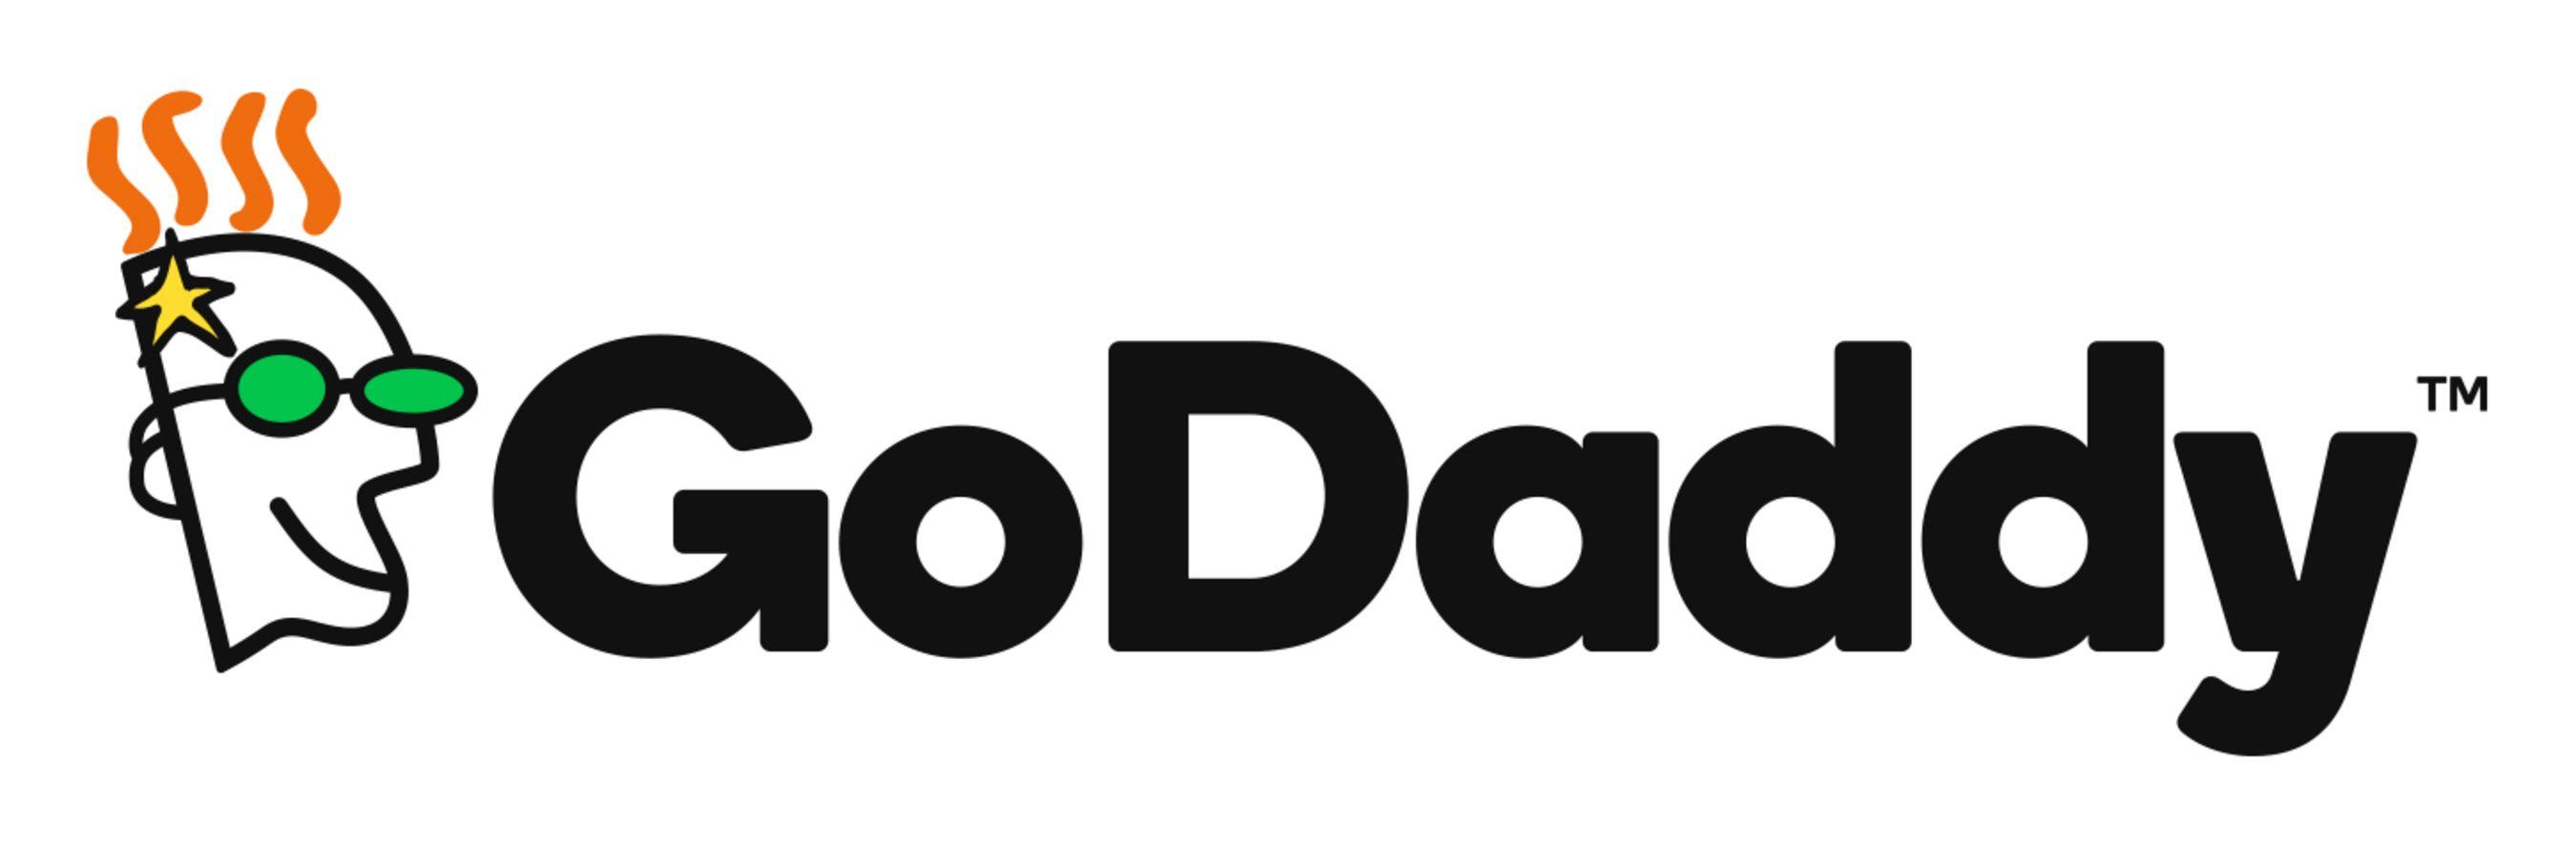 Godaddy Office 365 Logo - GoDaddy Announces Email Encryption And Email Archiving Features For ...